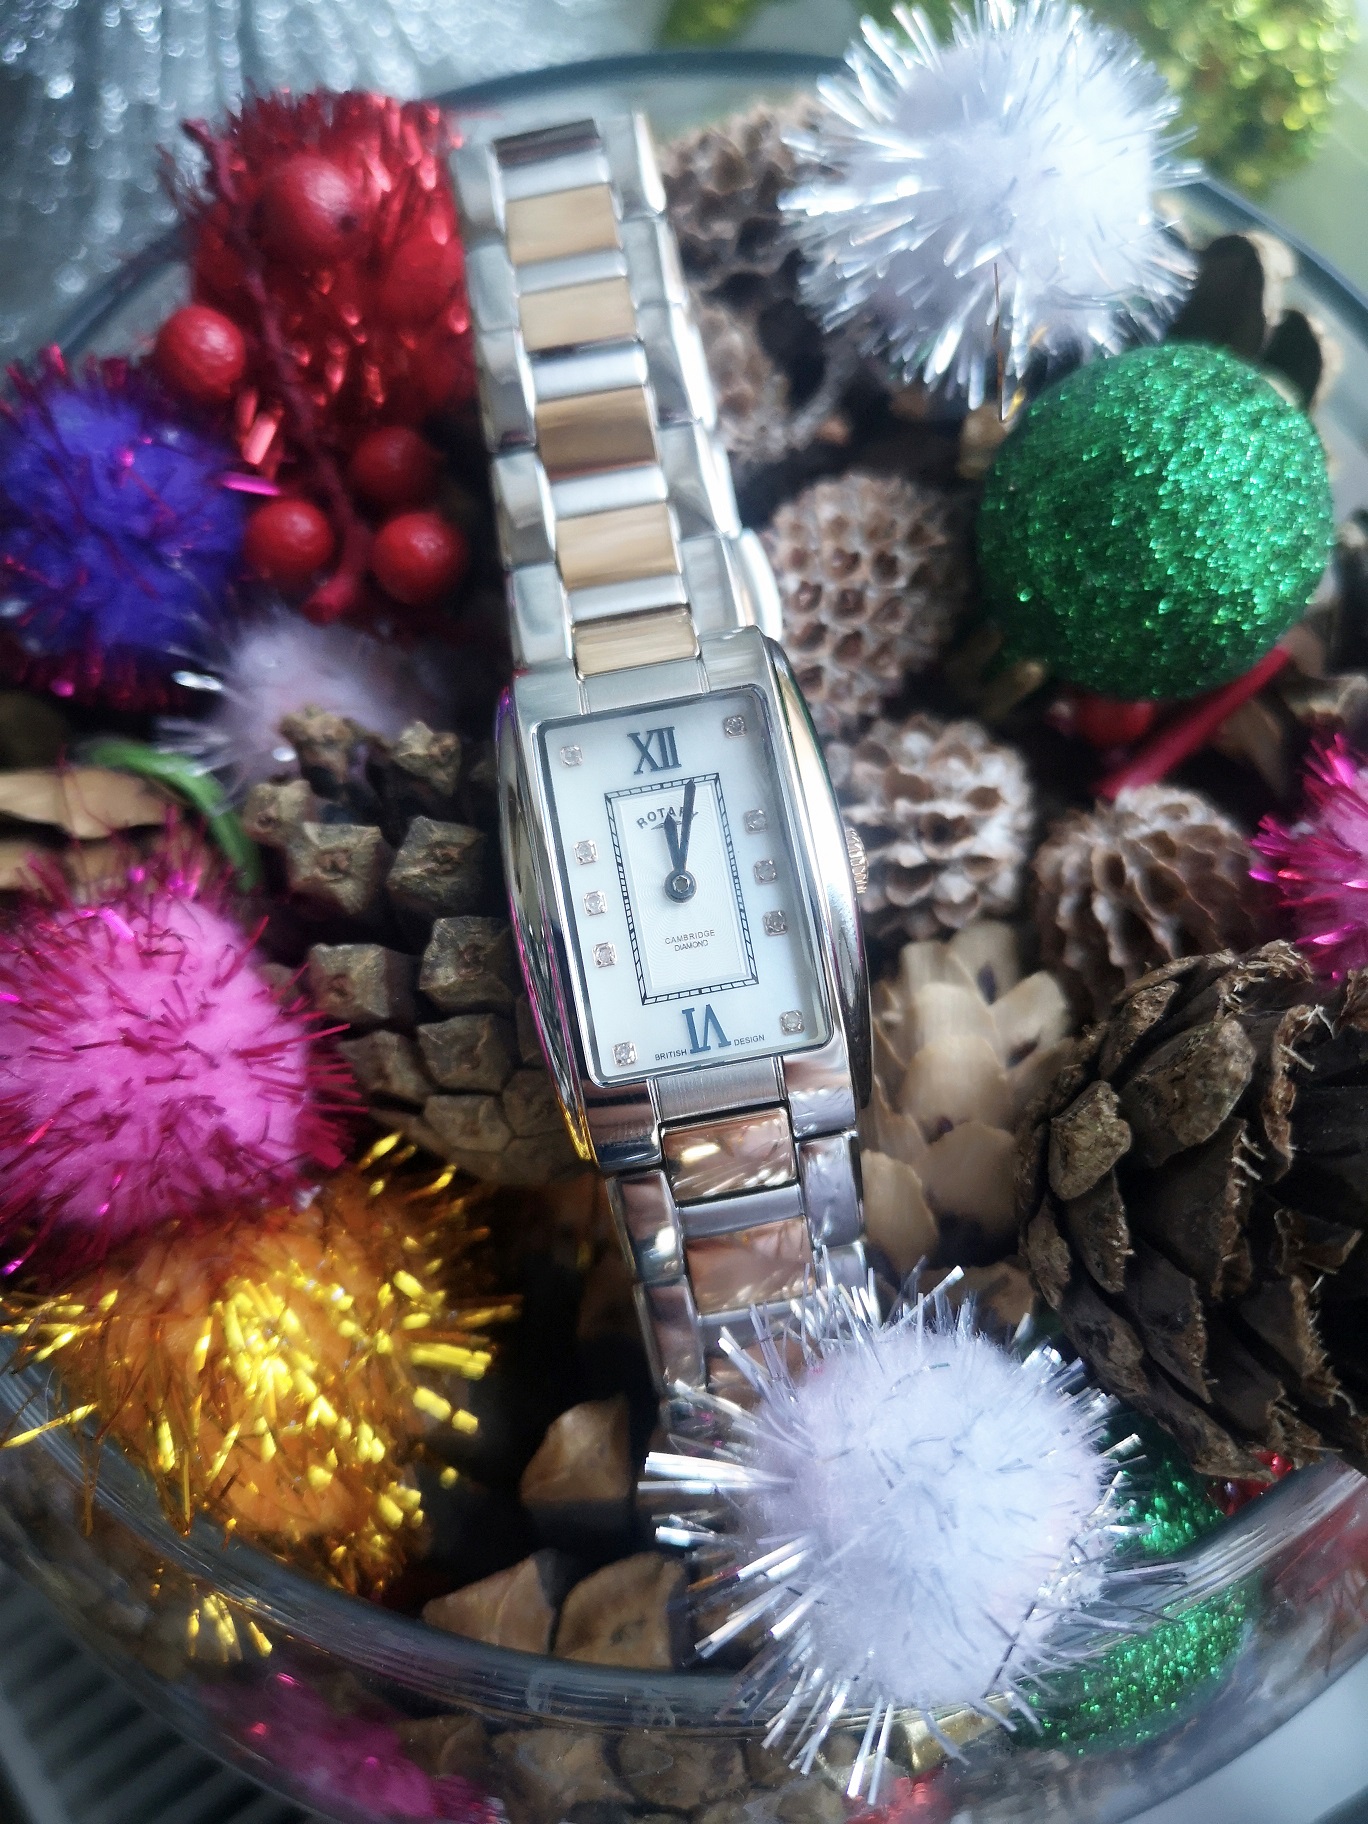 Rotary Cambridge Diamond Watch, Rotary Watches, Luxury Watches, Ladies Watch, Cambridge Collection, Win, Xmas Giveaways, Competition, the Frenchie Mummy, Stainless Steel Watch